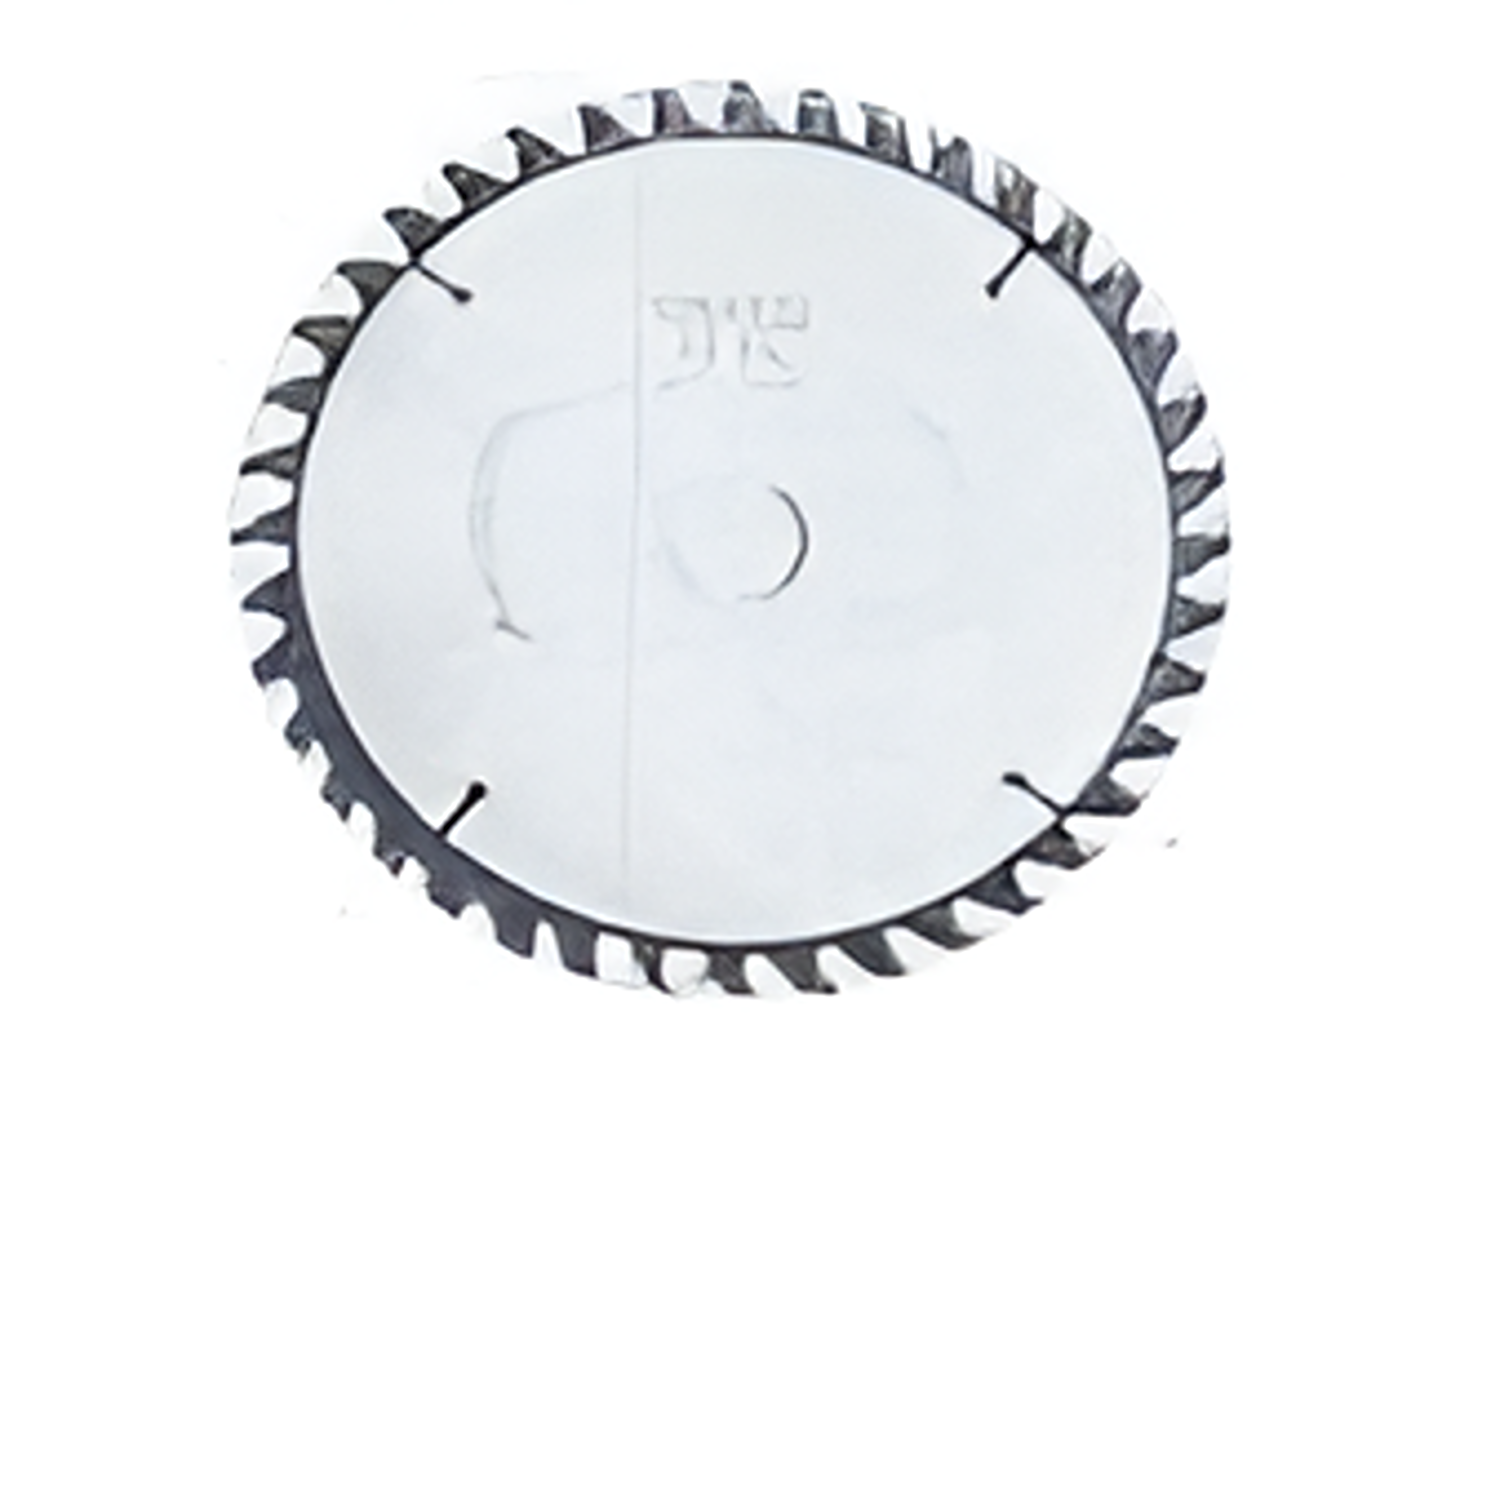 YEW AIK AE00677 Tipped Circular Saw Blade for Plastic - Premium Tipped Circular Saw Blade from YEW AIK - Shop now at Yew Aik.